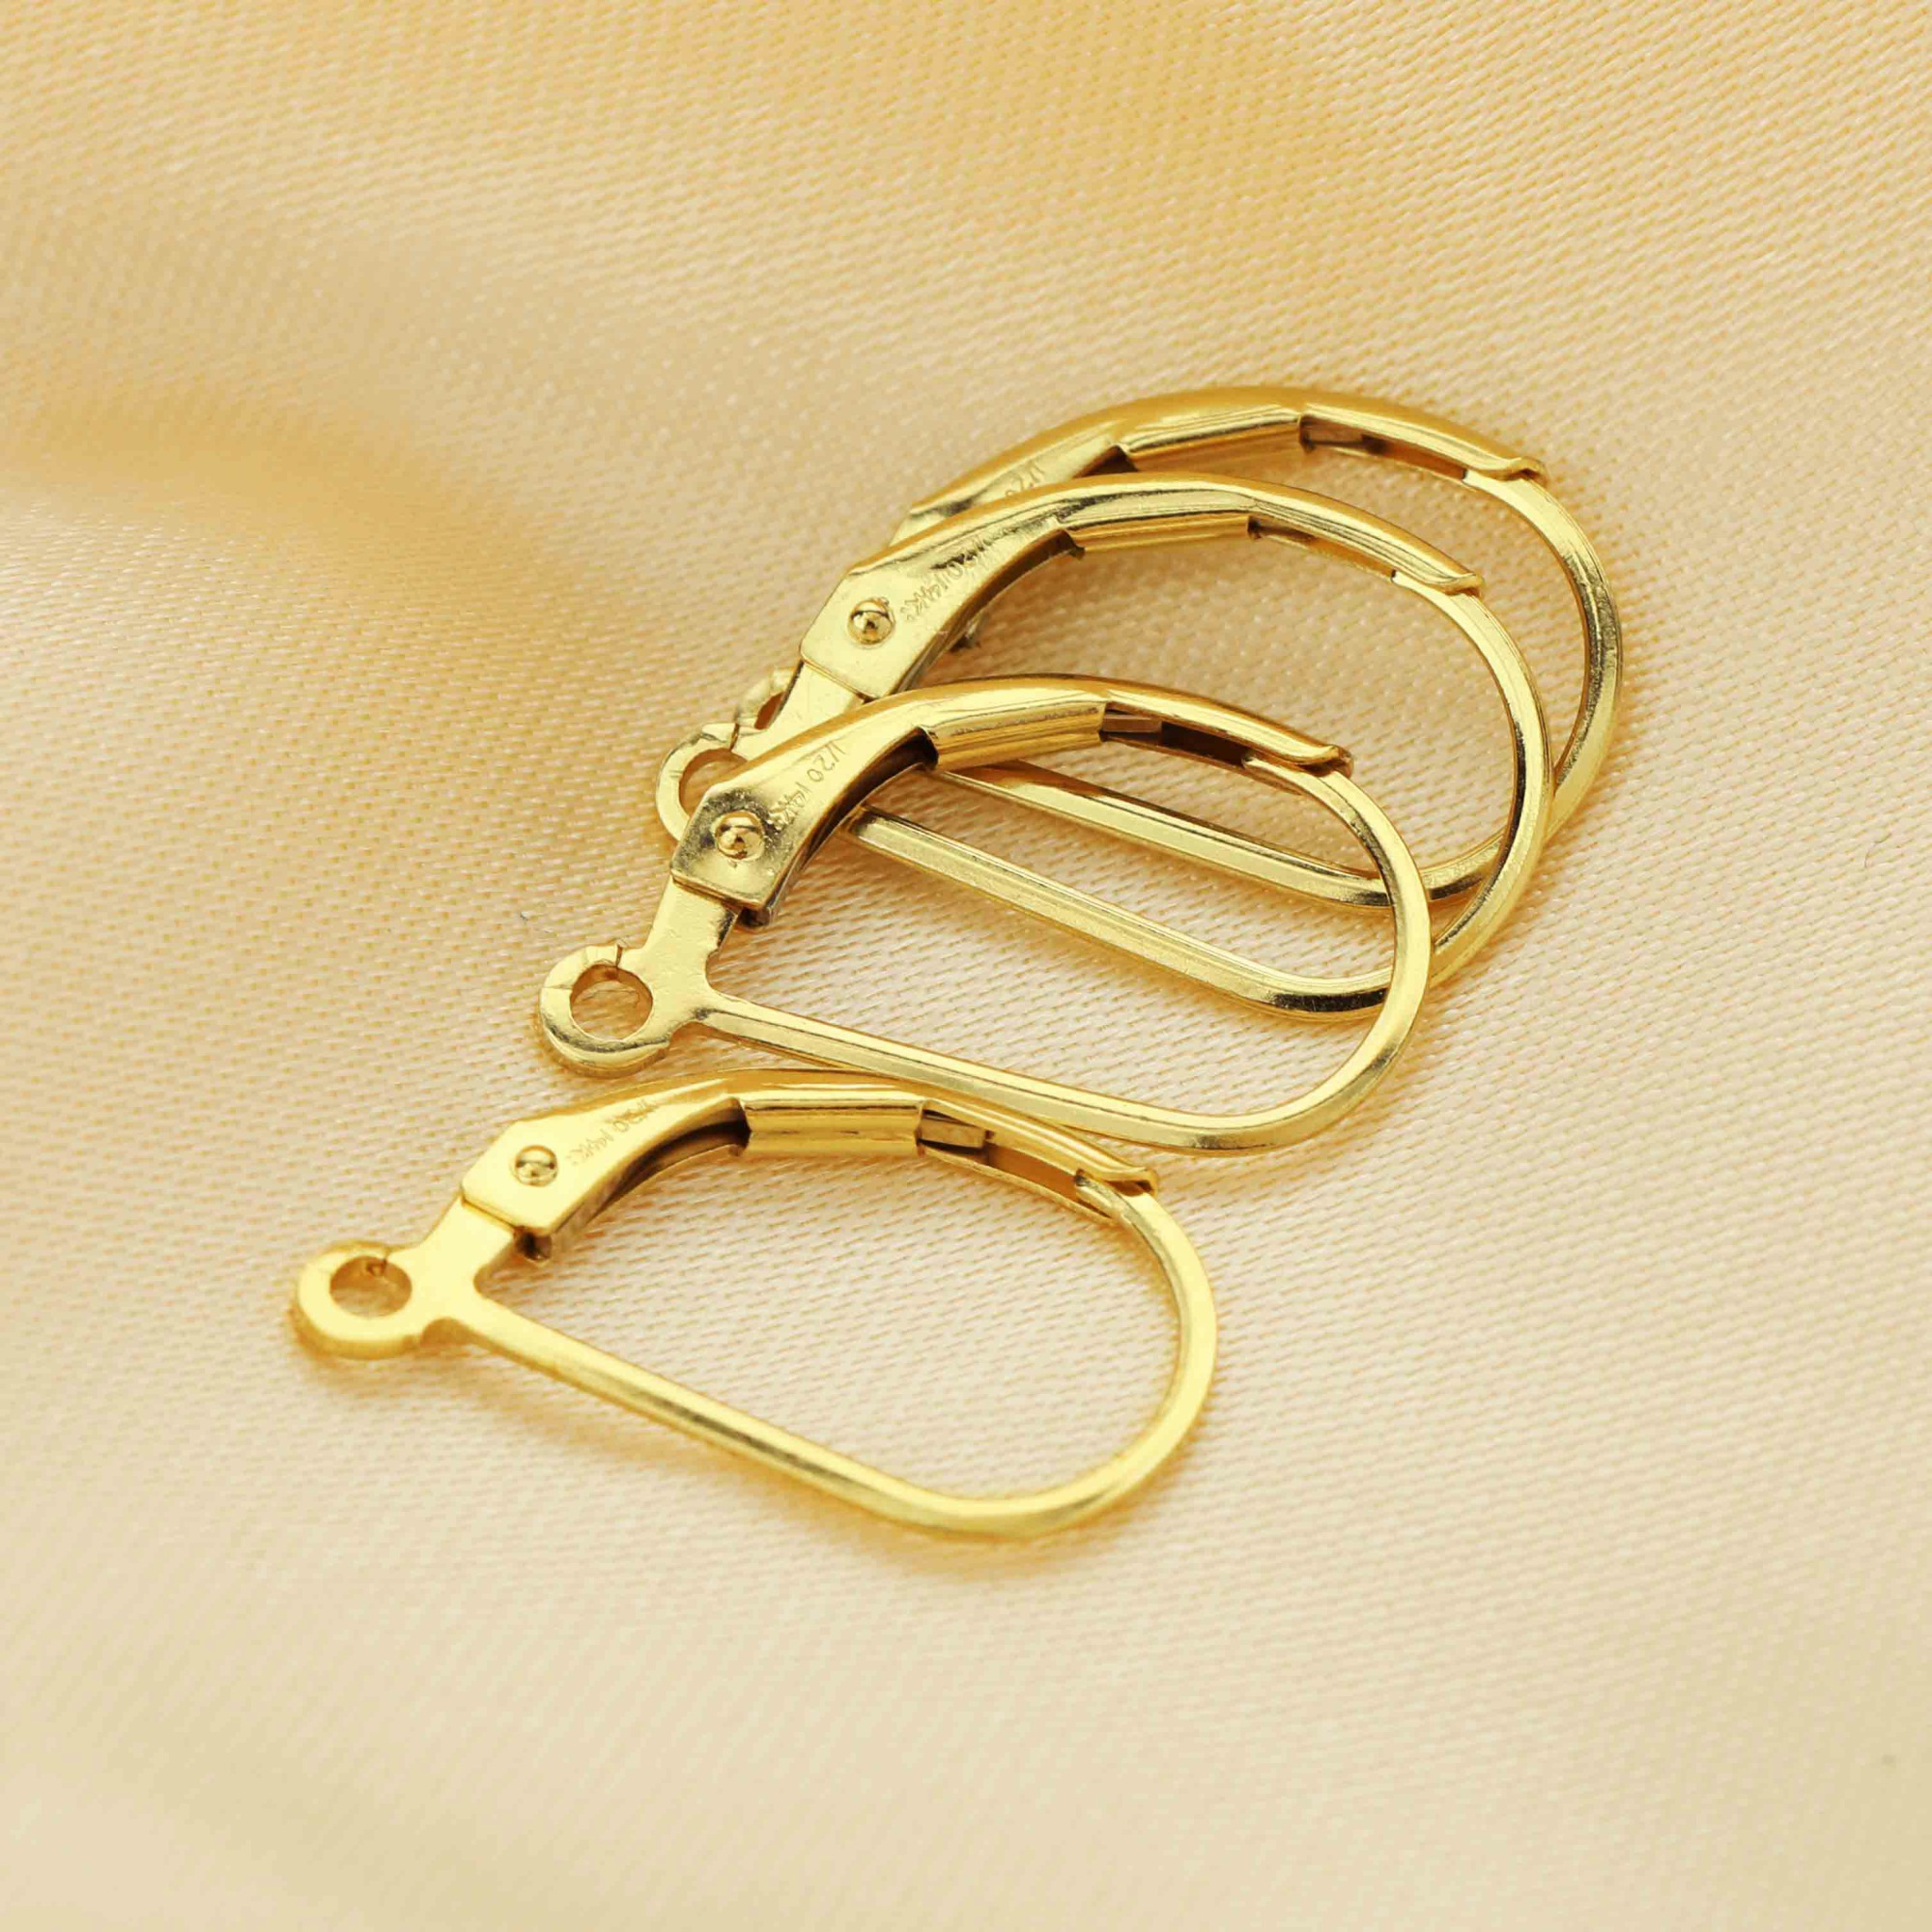 1Pair 8x15MM Minimalist DIY Leverback Earrings Hooks,14k Gold Filled Earrings Hooks,Simple Earrings Hook 1525009 - Click Image to Close